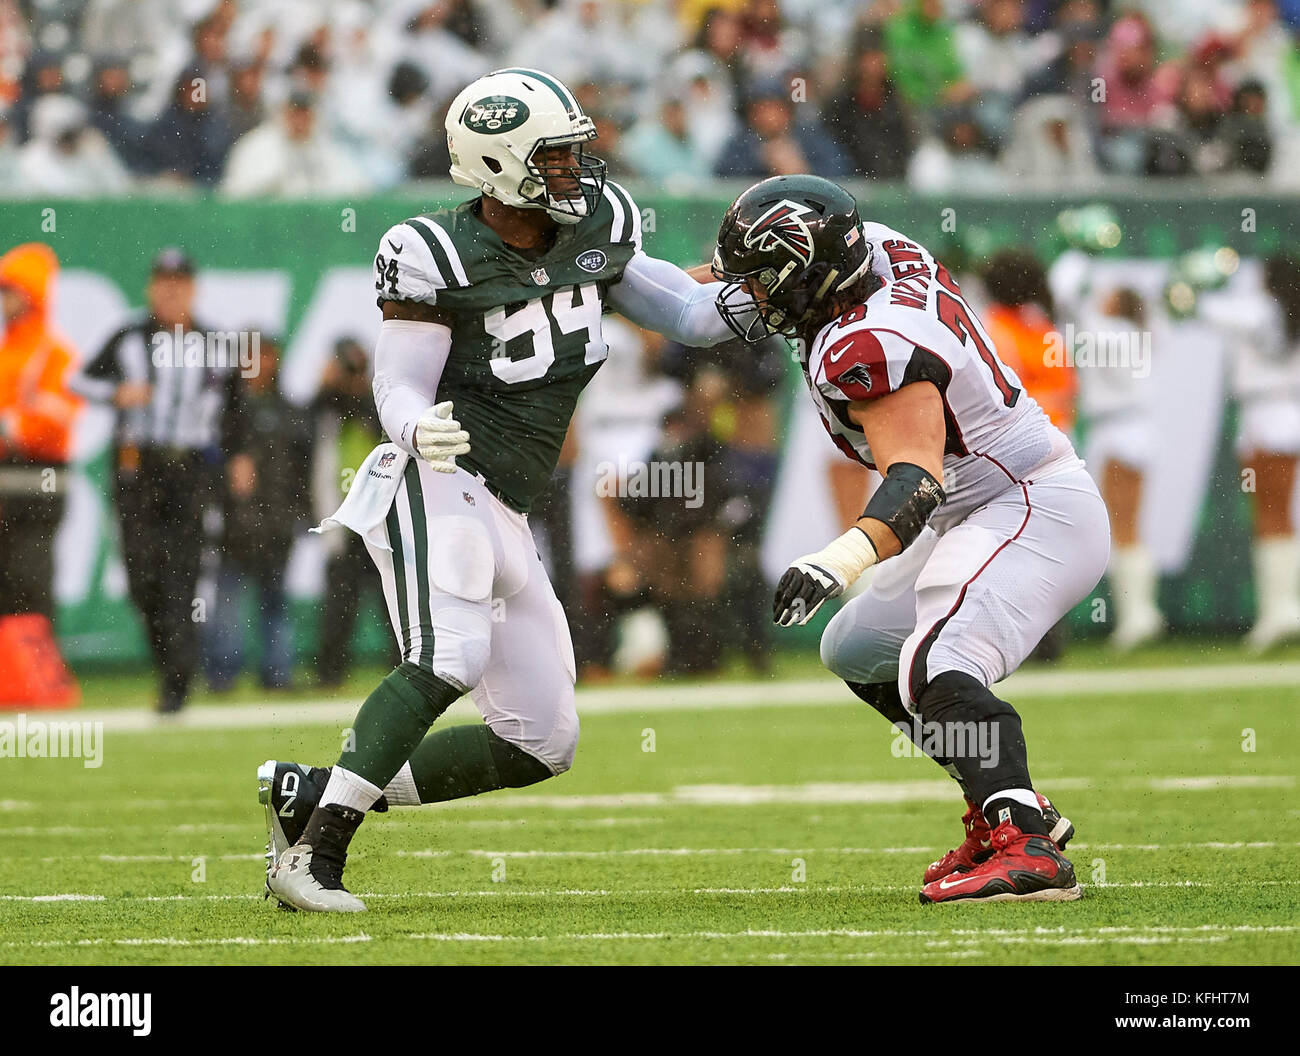 East Rutherford, New Jersey, USA. 29th Oct, 2017. Jets' defensive linemen Kony Ealy (94) tries to get around Falcons tackle Jake Matthews (70) during NFL action between the Atlanta Falcons and the New York Jets at MetLife Stadium in East Rutherford, New Jersey. Duncan Williams/CSM/Alamy Live News Stock Photo